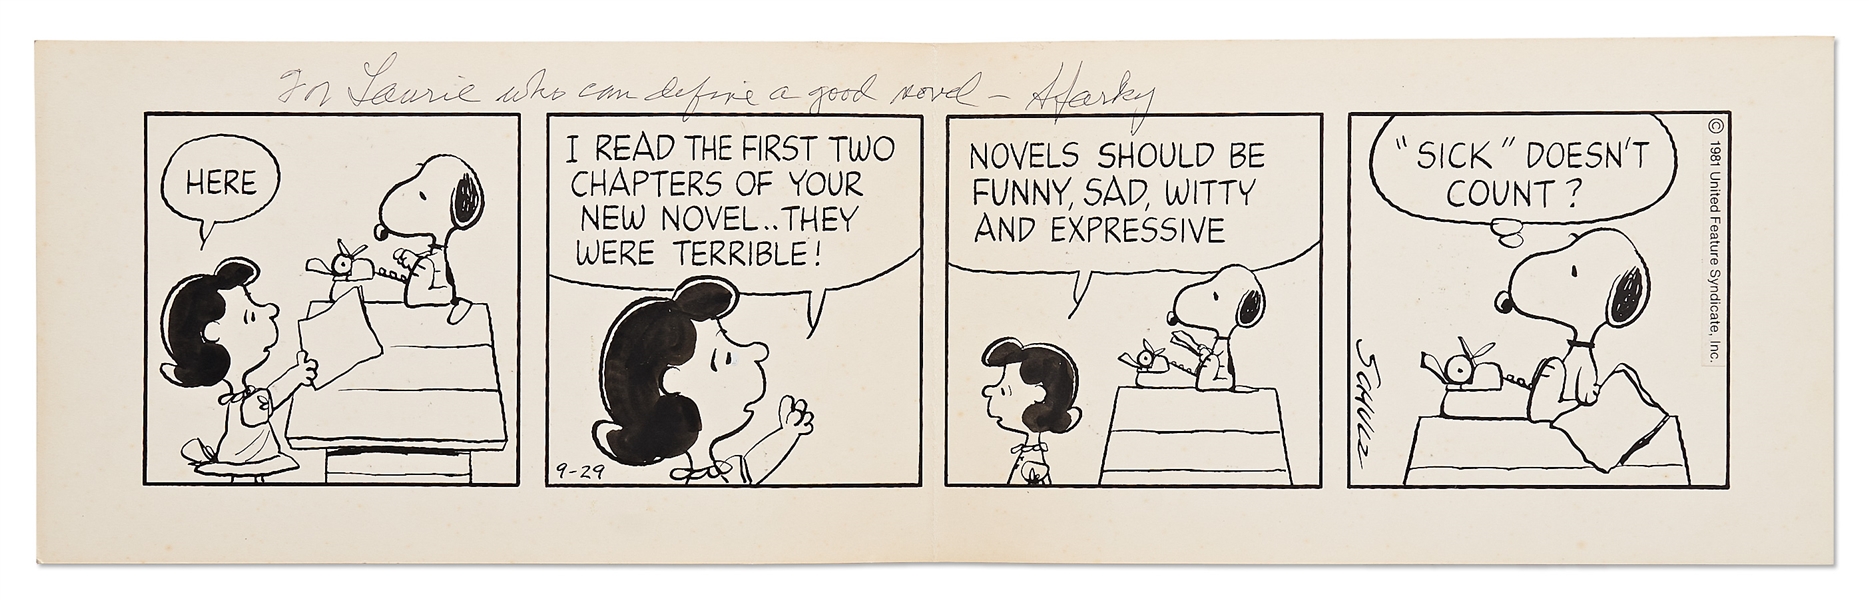 Charles Schulz Original Hand-Drawn ''Peanuts'' Comic Strip Featuring Snoopy the Novelist & Lucy the Literary Critic